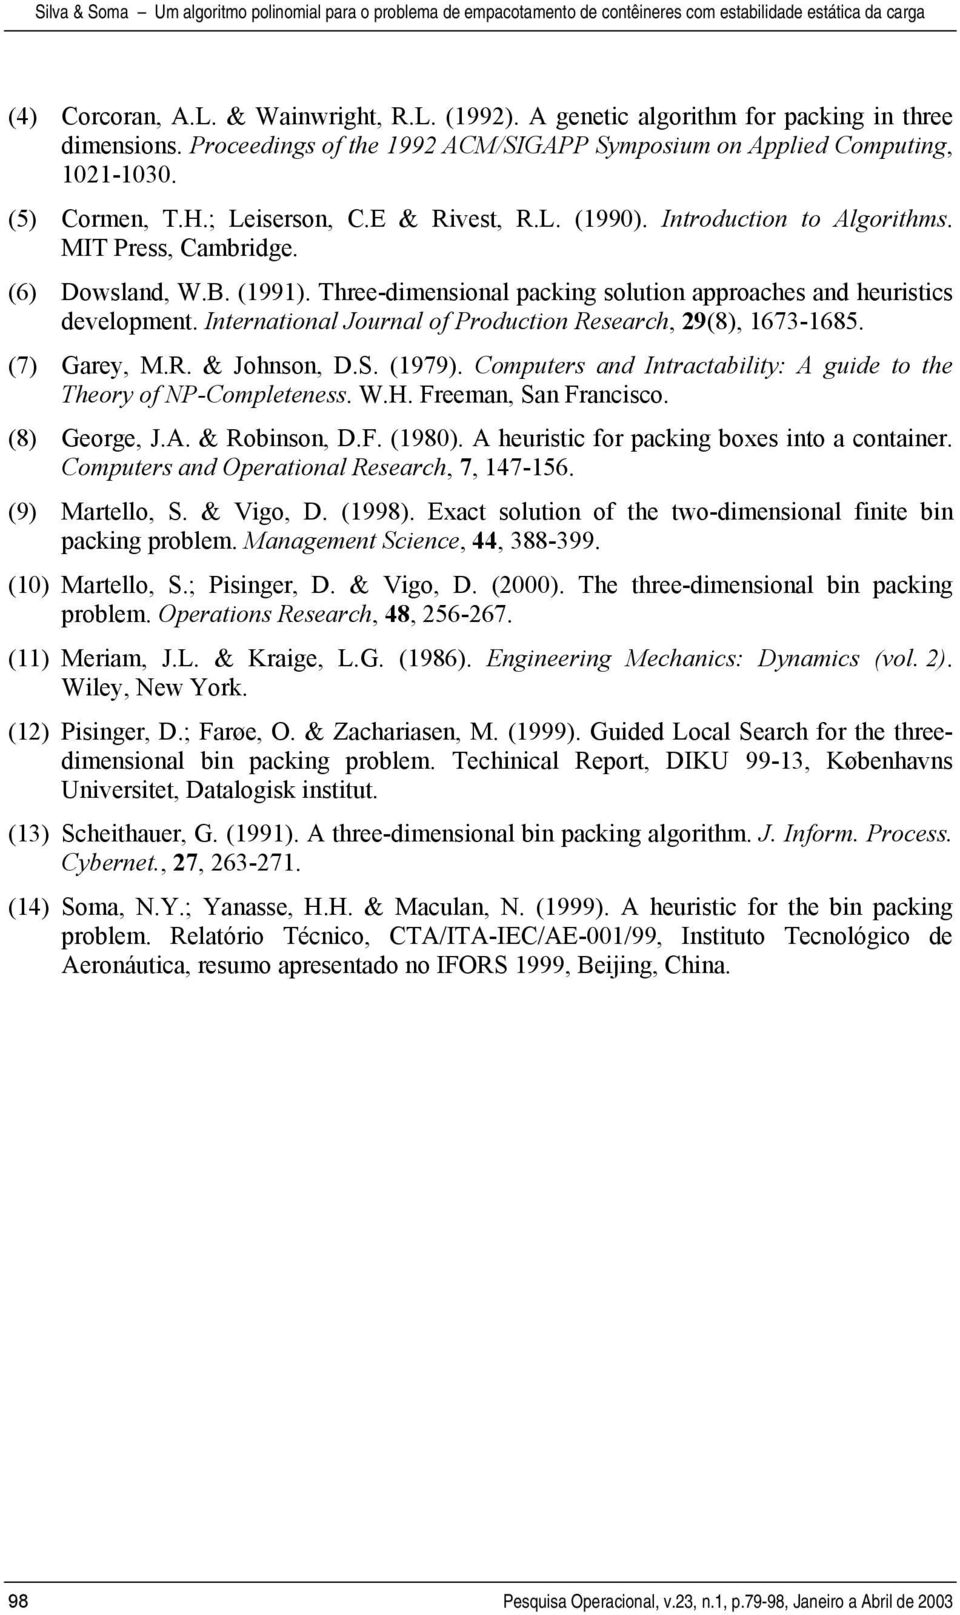 International Journal of Production Research, 29(8), 1673-1685. (7) Garey, M.R. & Johnson, D.S. (1979). Computers and Intractability: A guide to the Theory of NP-Completeness. W.H.